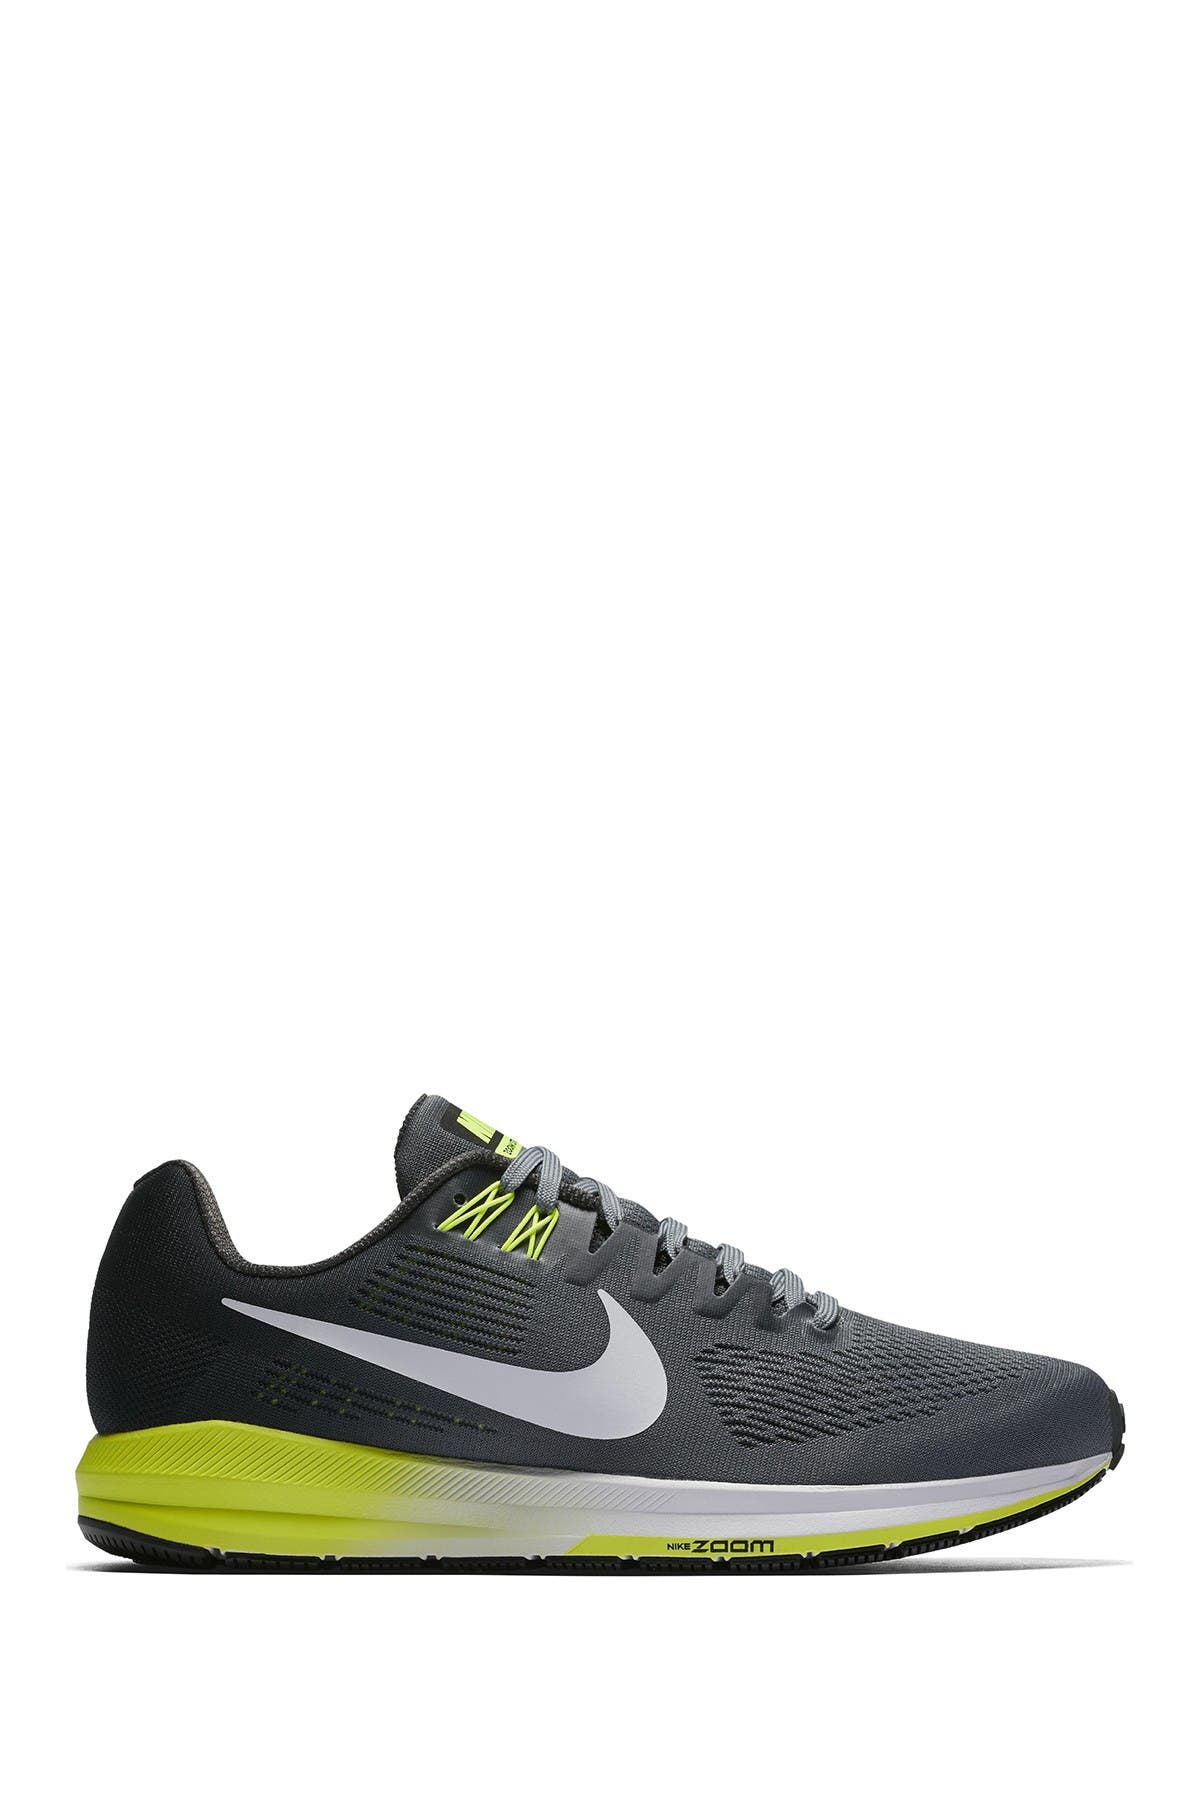 nike zoom structure 21 grey